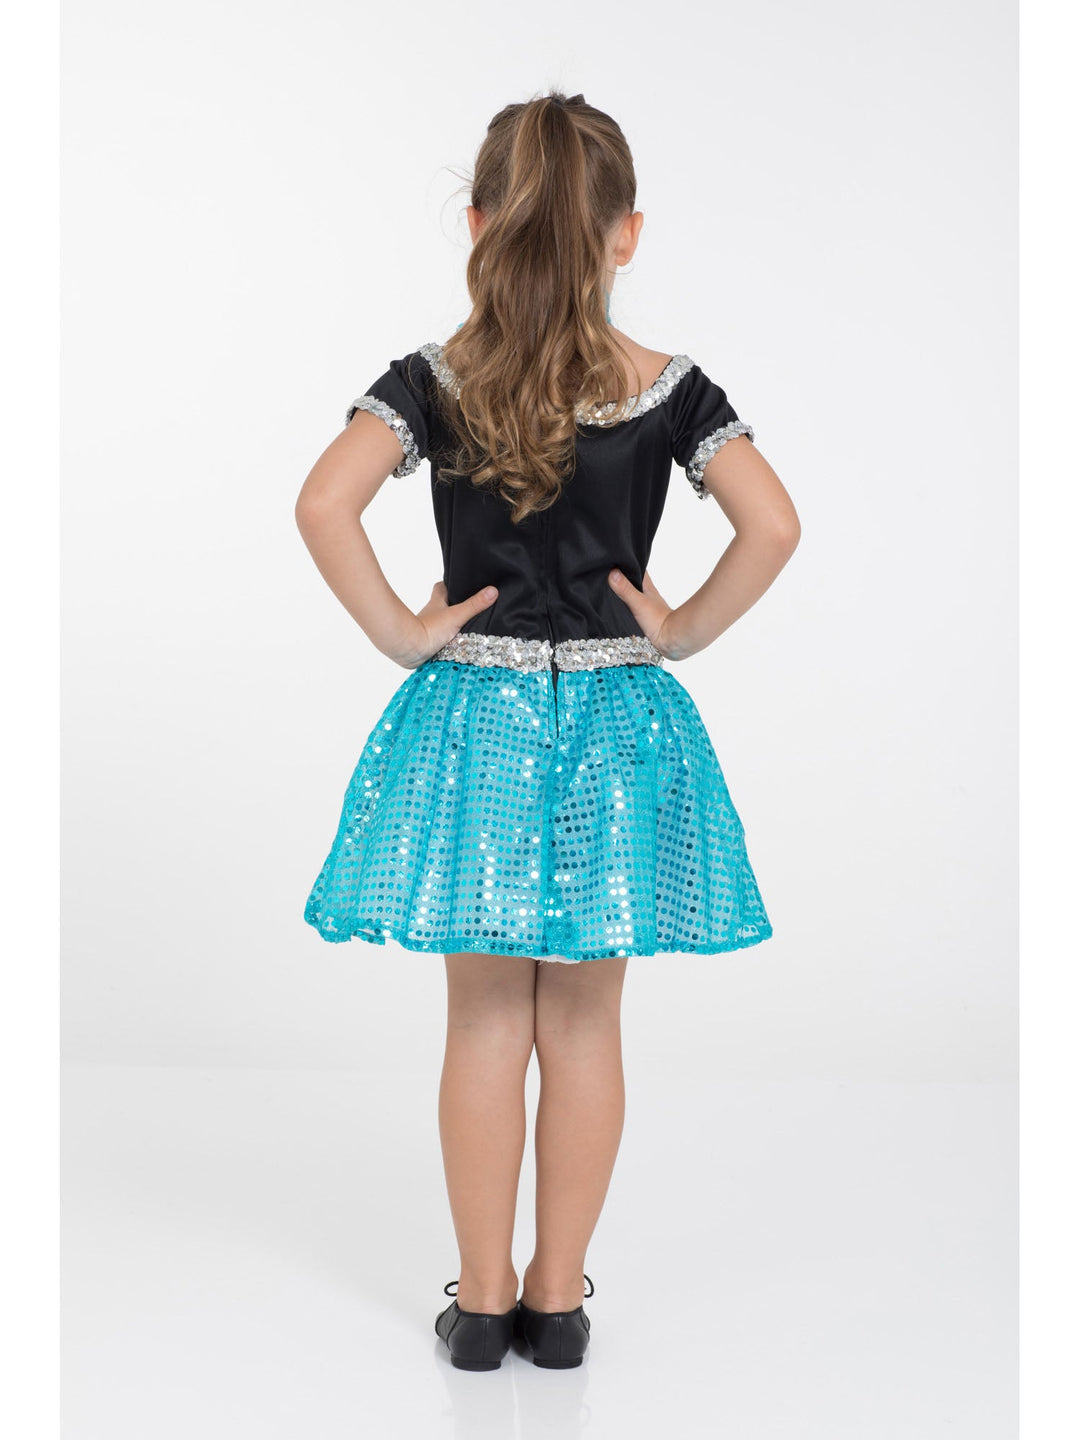 Rock and Roll Sequin Dress Turquoise Poodle Girl Costume